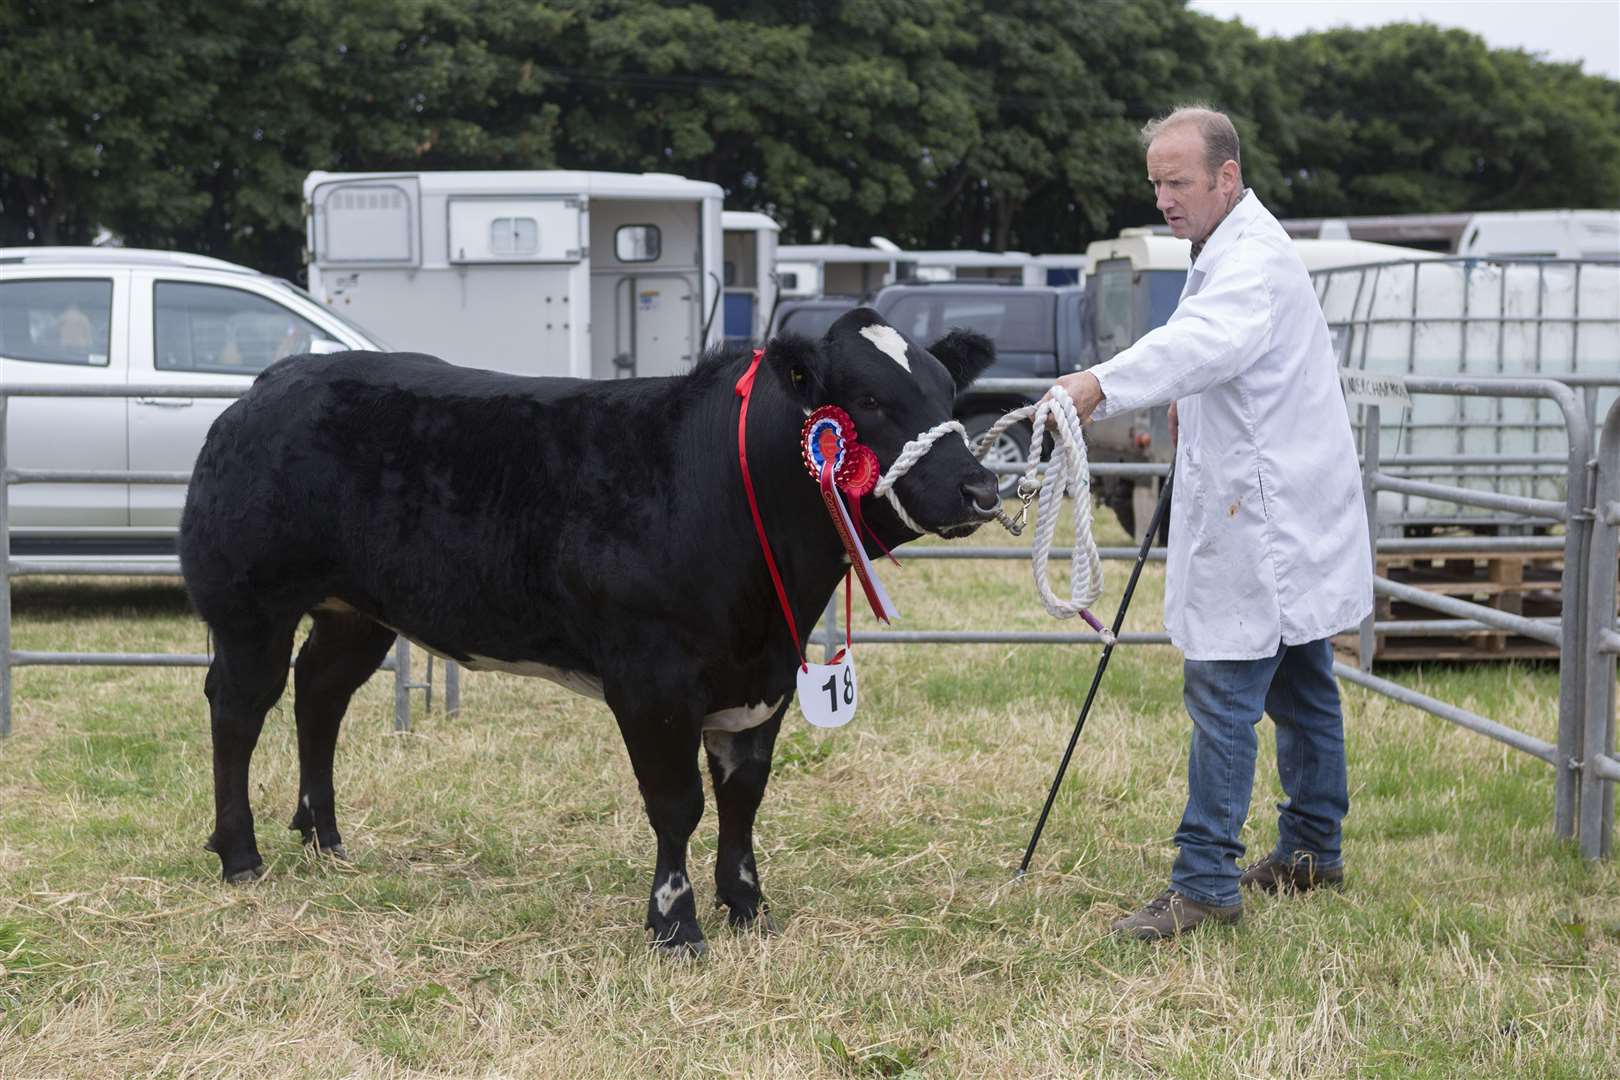 J Munro & Son, Invercharron Farm, Ardgay, took the supreme cattle championship with their commercial champion, Jacket Potato, a 15-month-old British Blue cross heifer, after Caithness Norseman. Mark Munro is holding the champion. Picture: Robert MacDonald / Northern Studios